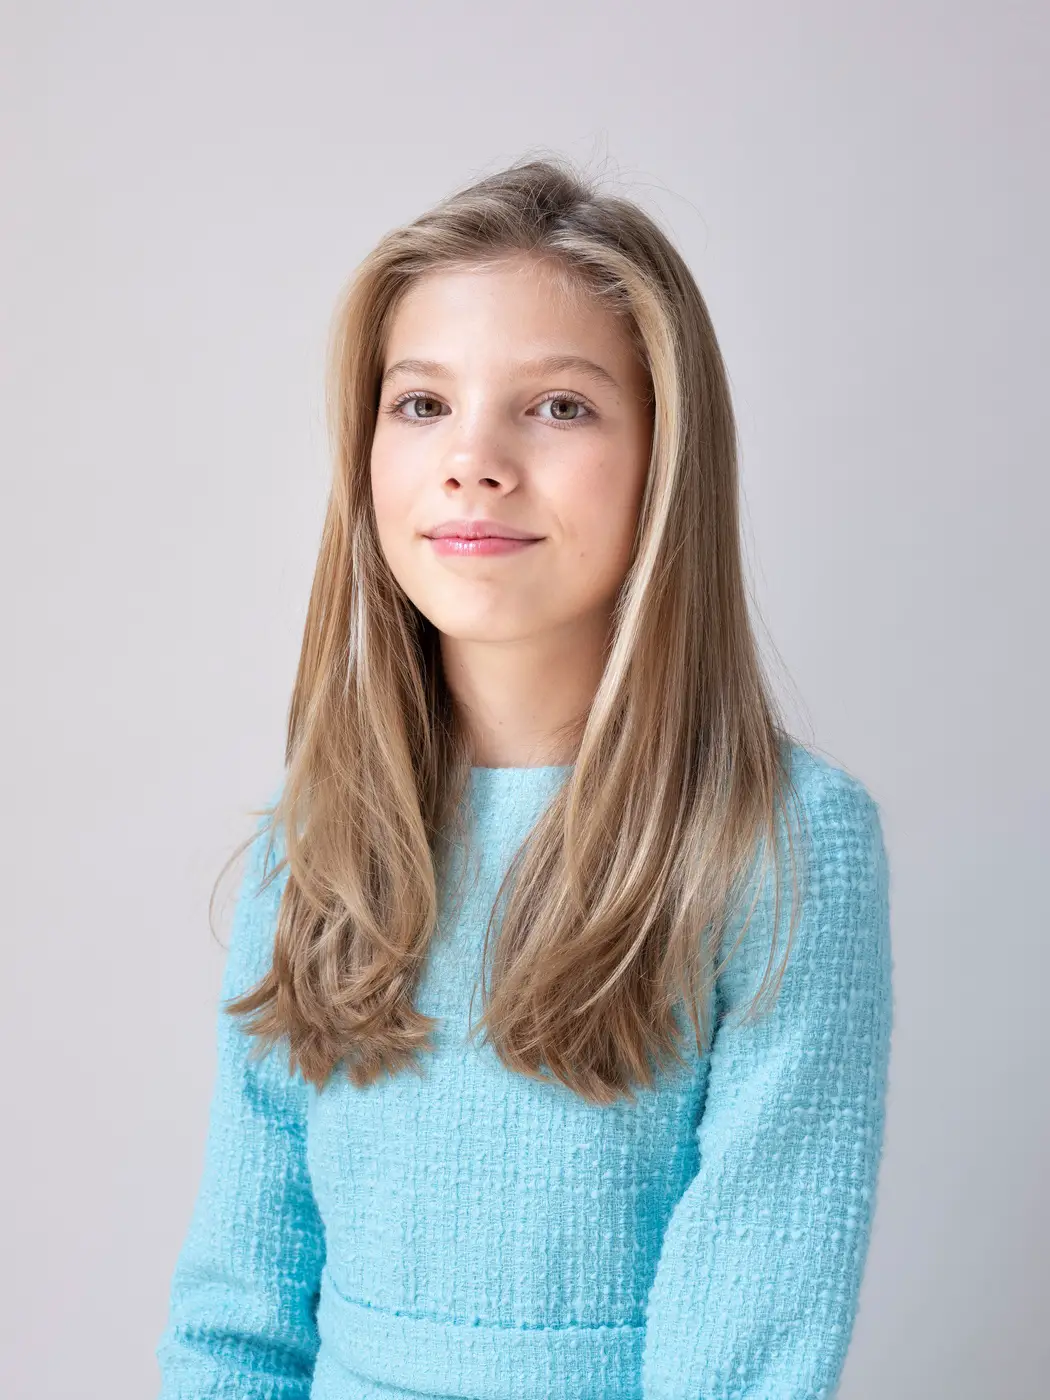 New Official portrait of Infanta Sofia of Spain